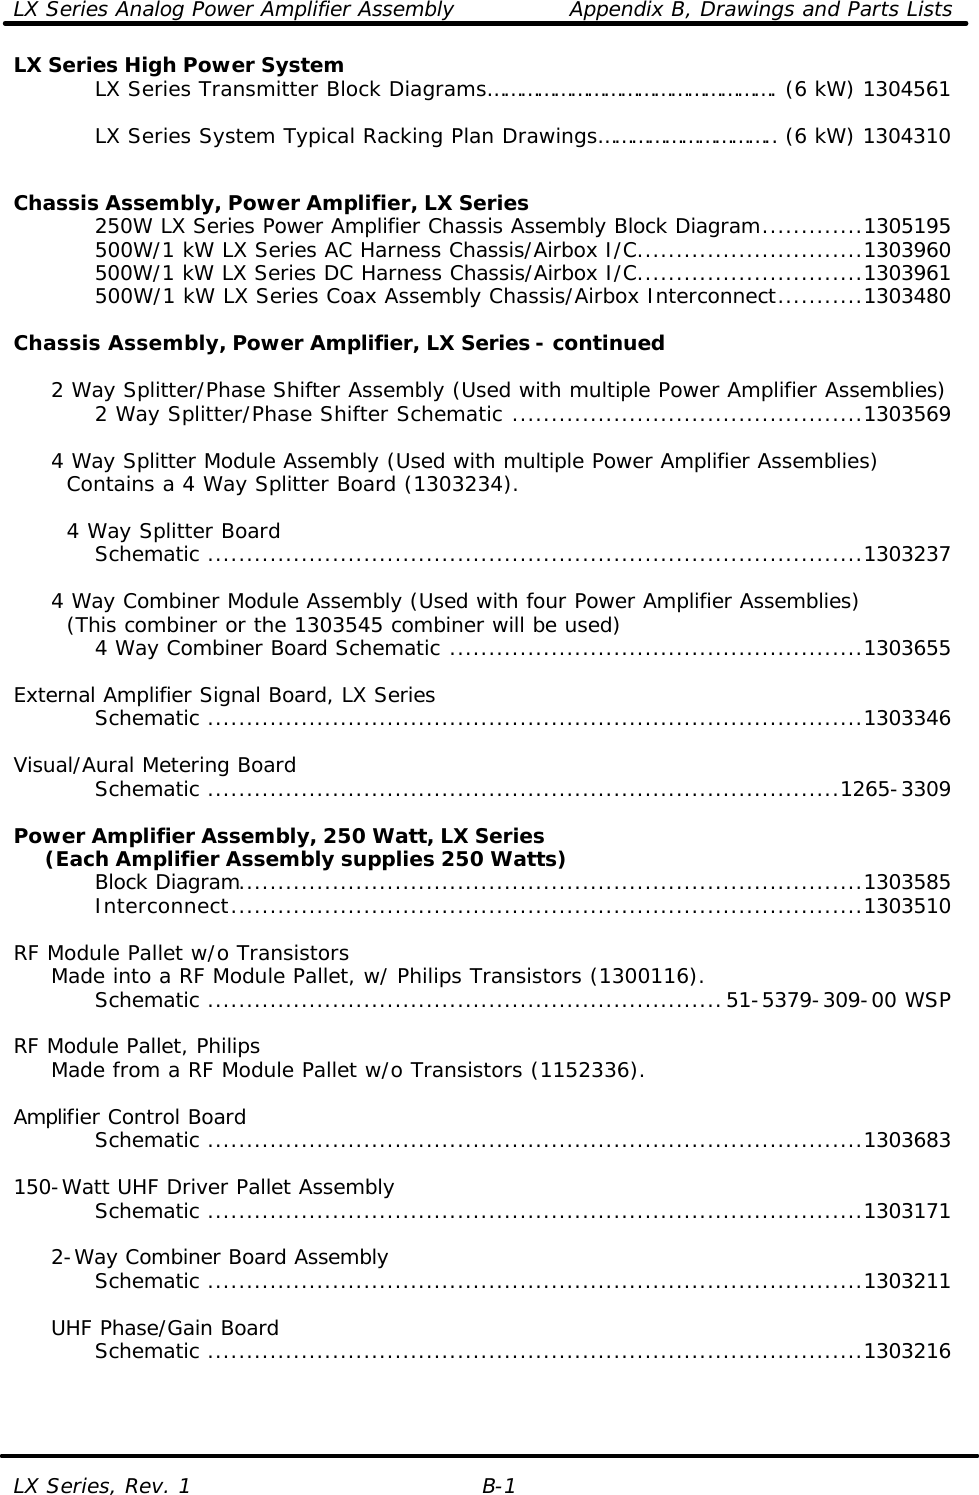 LX Series Analog Power Amplifier Assembly Appendix B, Drawings and Parts Lists LX Series, Rev. 1 B-1 LX Series High Power System     LX Series Transmitter Block Diagrams……………………………………………. (6 kW) 1304561          LX Series System Typical Racking Plan Drawings………………………….. (6 kW) 1304310         Chassis Assembly, Power Amplifier, LX Series     250W LX Series Power Amplifier Chassis Assembly Block Diagram.............1305195     500W/1 kW LX Series AC Harness Chassis/Airbox I/C.............................1303960     500W/1 kW LX Series DC Harness Chassis/Airbox I/C.............................1303961     500W/1 kW LX Series Coax Assembly Chassis/Airbox Interconnect...........1303480  Chassis Assembly, Power Amplifier, LX Series - continued       2 Way Splitter/Phase Shifter Assembly (Used with multiple Power Amplifier Assemblies)     2 Way Splitter/Phase Shifter Schematic .............................................1303569       4 Way Splitter Module Assembly (Used with multiple Power Amplifier Assemblies)    Contains a 4 Way Splitter Board (1303234).         4 Way Splitter Board     Schematic ....................................................................................1303237           4 Way Combiner Module Assembly (Used with four Power Amplifier Assemblies)    (This combiner or the 1303545 combiner will be used)     4 Way Combiner Board Schematic .....................................................1303655      External Amplifier Signal Board, LX Series     Schematic ....................................................................................1303346      Visual/Aural Metering Board     Schematic .................................................................................1265-3309      Power Amplifier Assembly, 250 Watt, LX Series      (Each Amplifier Assembly supplies 250 Watts)     Block Diagram................................................................................1303585     Interconnect.................................................................................1303510      RF Module Pallet w/o Transistors  Made into a RF Module Pallet, w/ Philips Transistors (1300116).     Schematic ..................................................................51-5379-309-00 WSP      RF Module Pallet, Philips  Made from a RF Module Pallet w/o Transistors (1152336).      Amplifier Control Board     Schematic ....................................................................................1303683      150-Watt UHF Driver Pallet Assembly     Schematic ....................................................................................1303171       2-Way Combiner Board Assembly     Schematic ....................................................................................1303211       UHF Phase/Gain Board     Schematic ....................................................................................1303216        